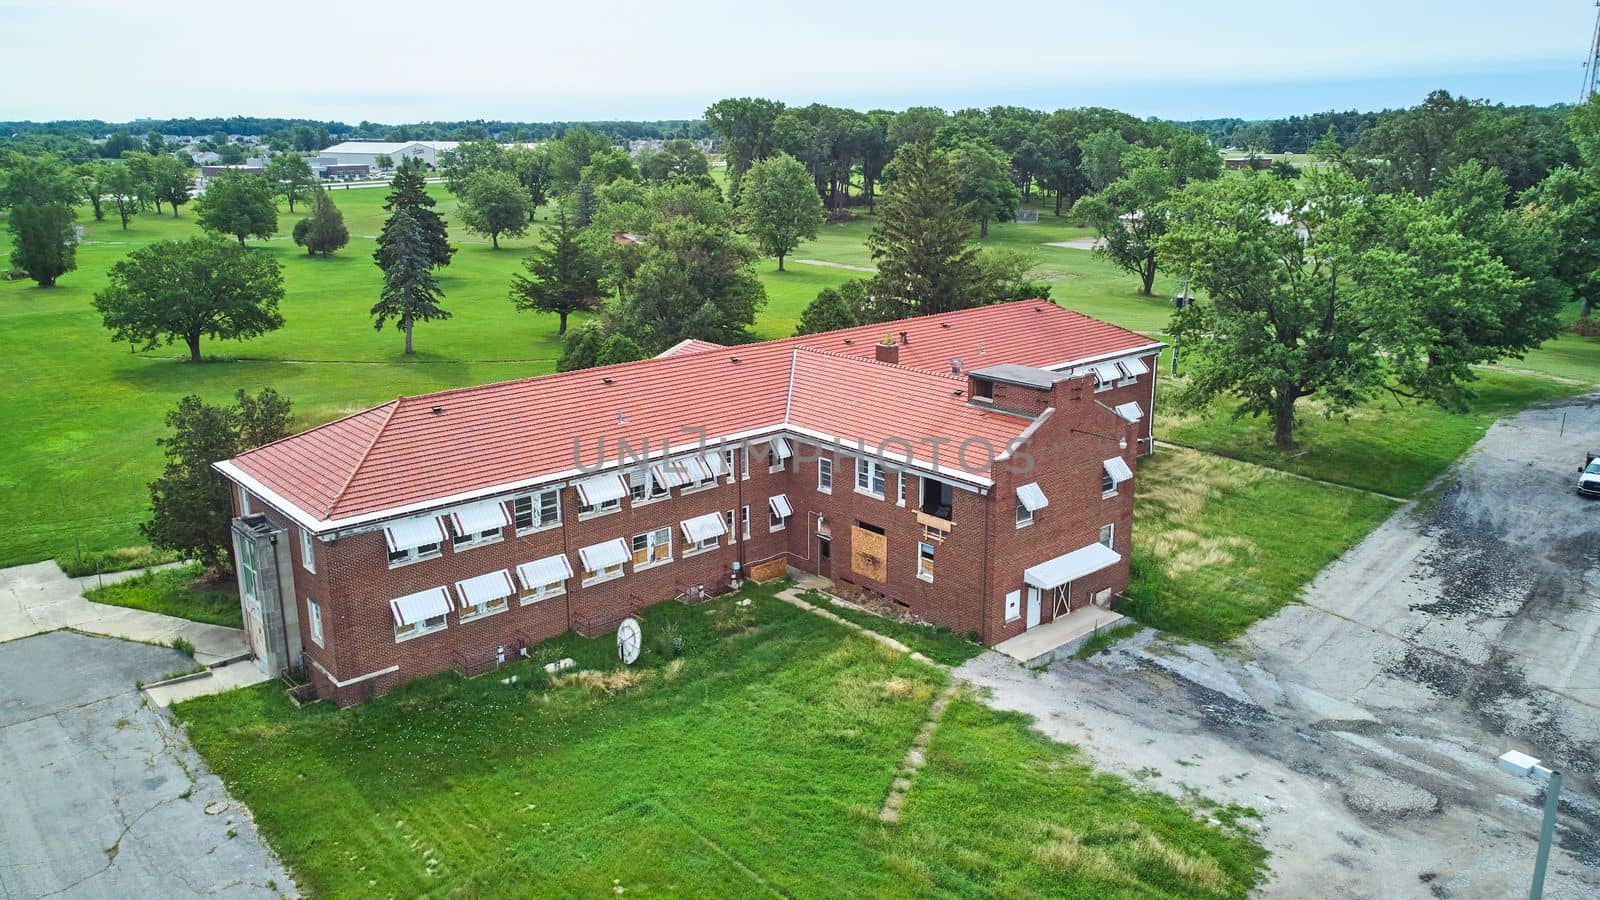 Image of Old abandoned brick building aerial surrounded by trees